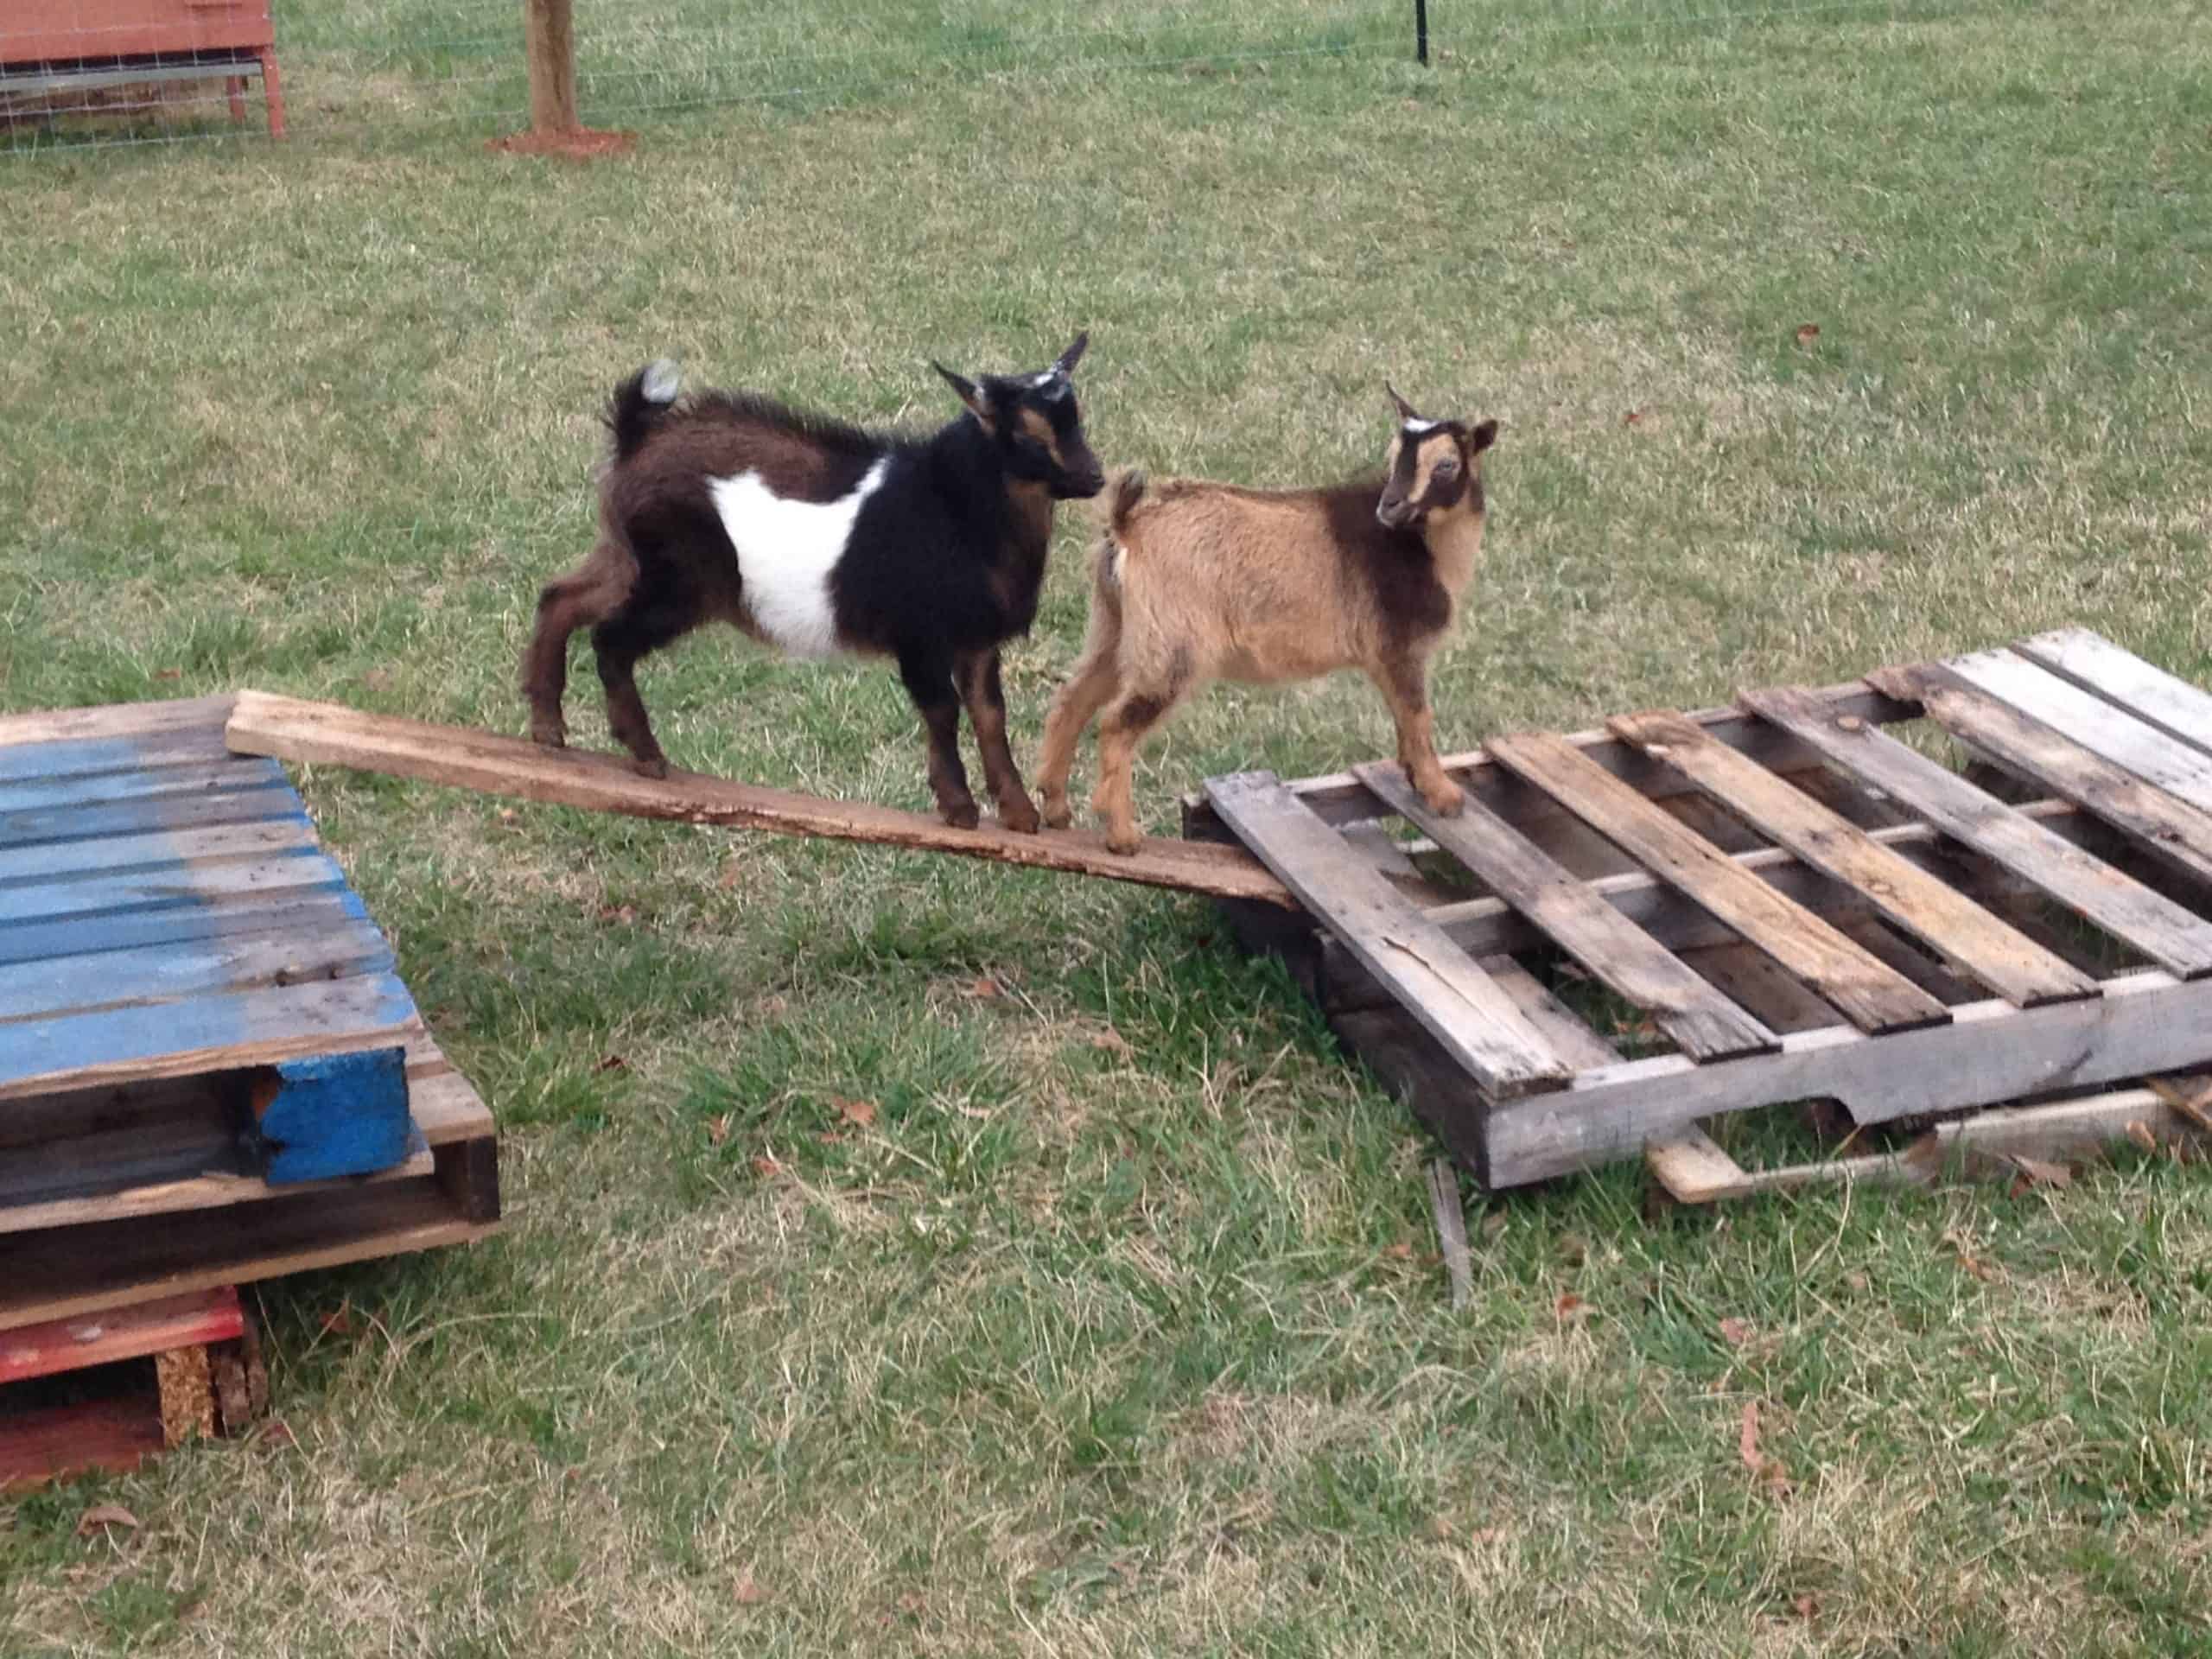 2 goats on a stack of pallets